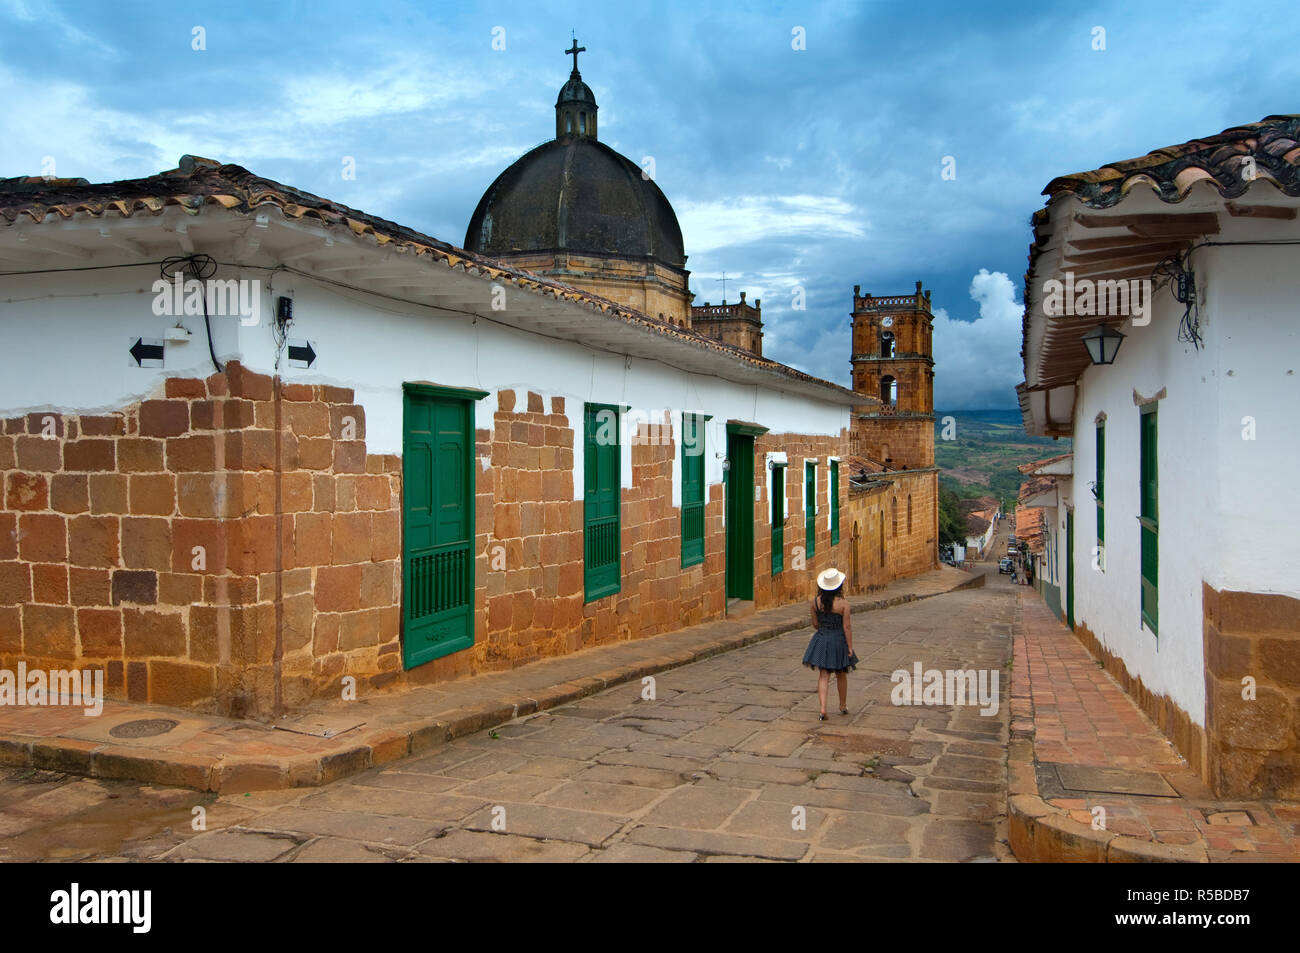 Colombia, Barichara, Colonial Town, National Monument, Santander Province, 18th century Cathedral de la Immaculada Concepcion, Colombian Woman (MR) Stock Photo